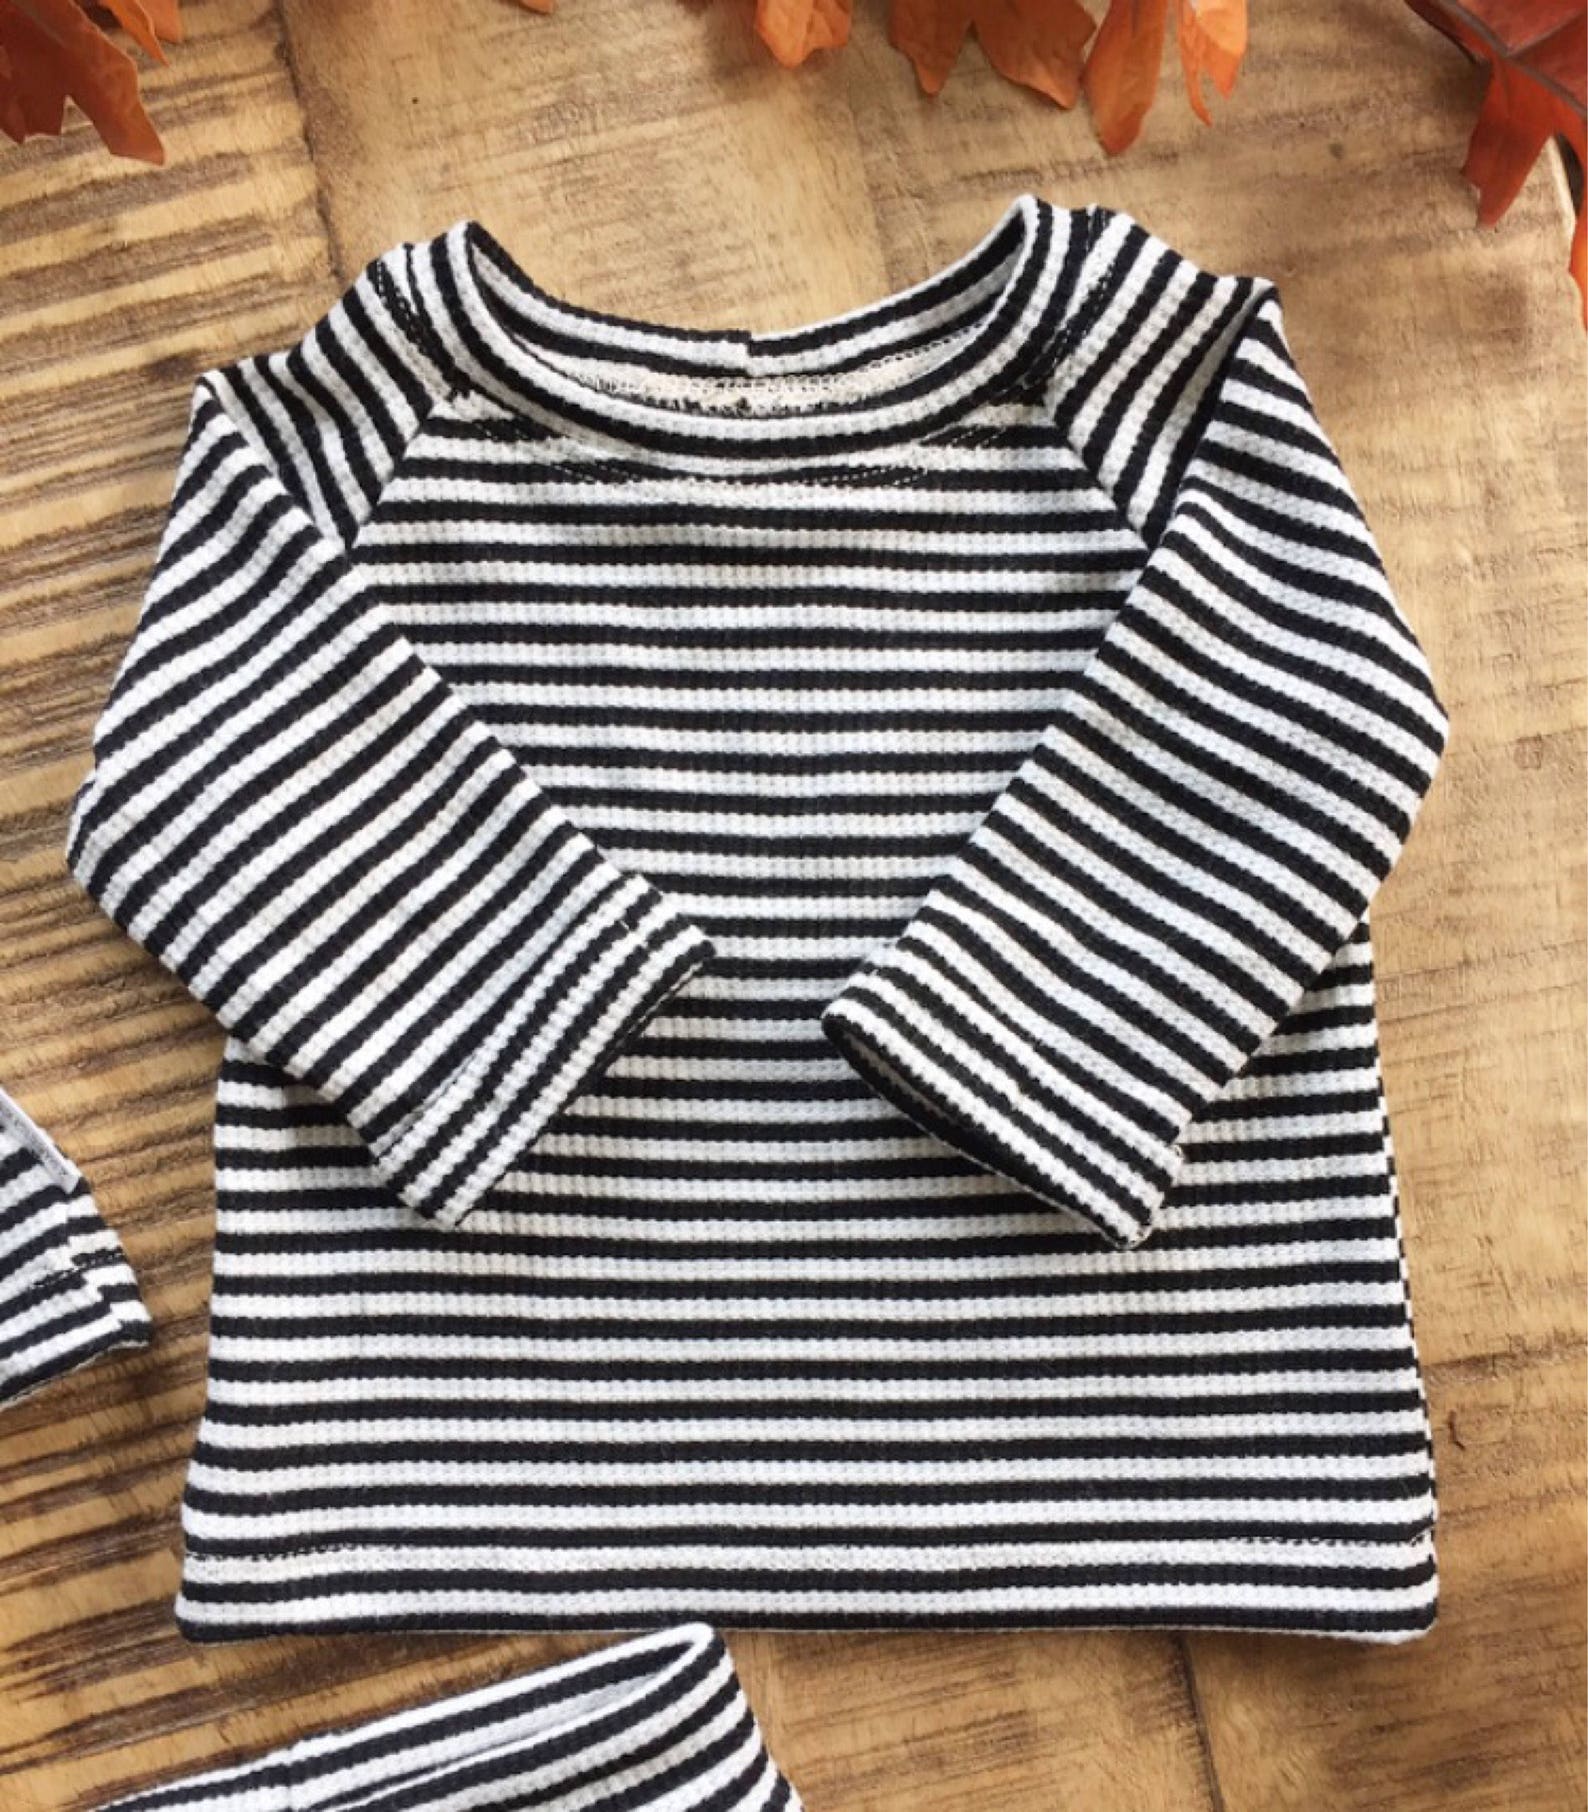 Gender neutral baby outfit black and white stripes baby boy | Etsy